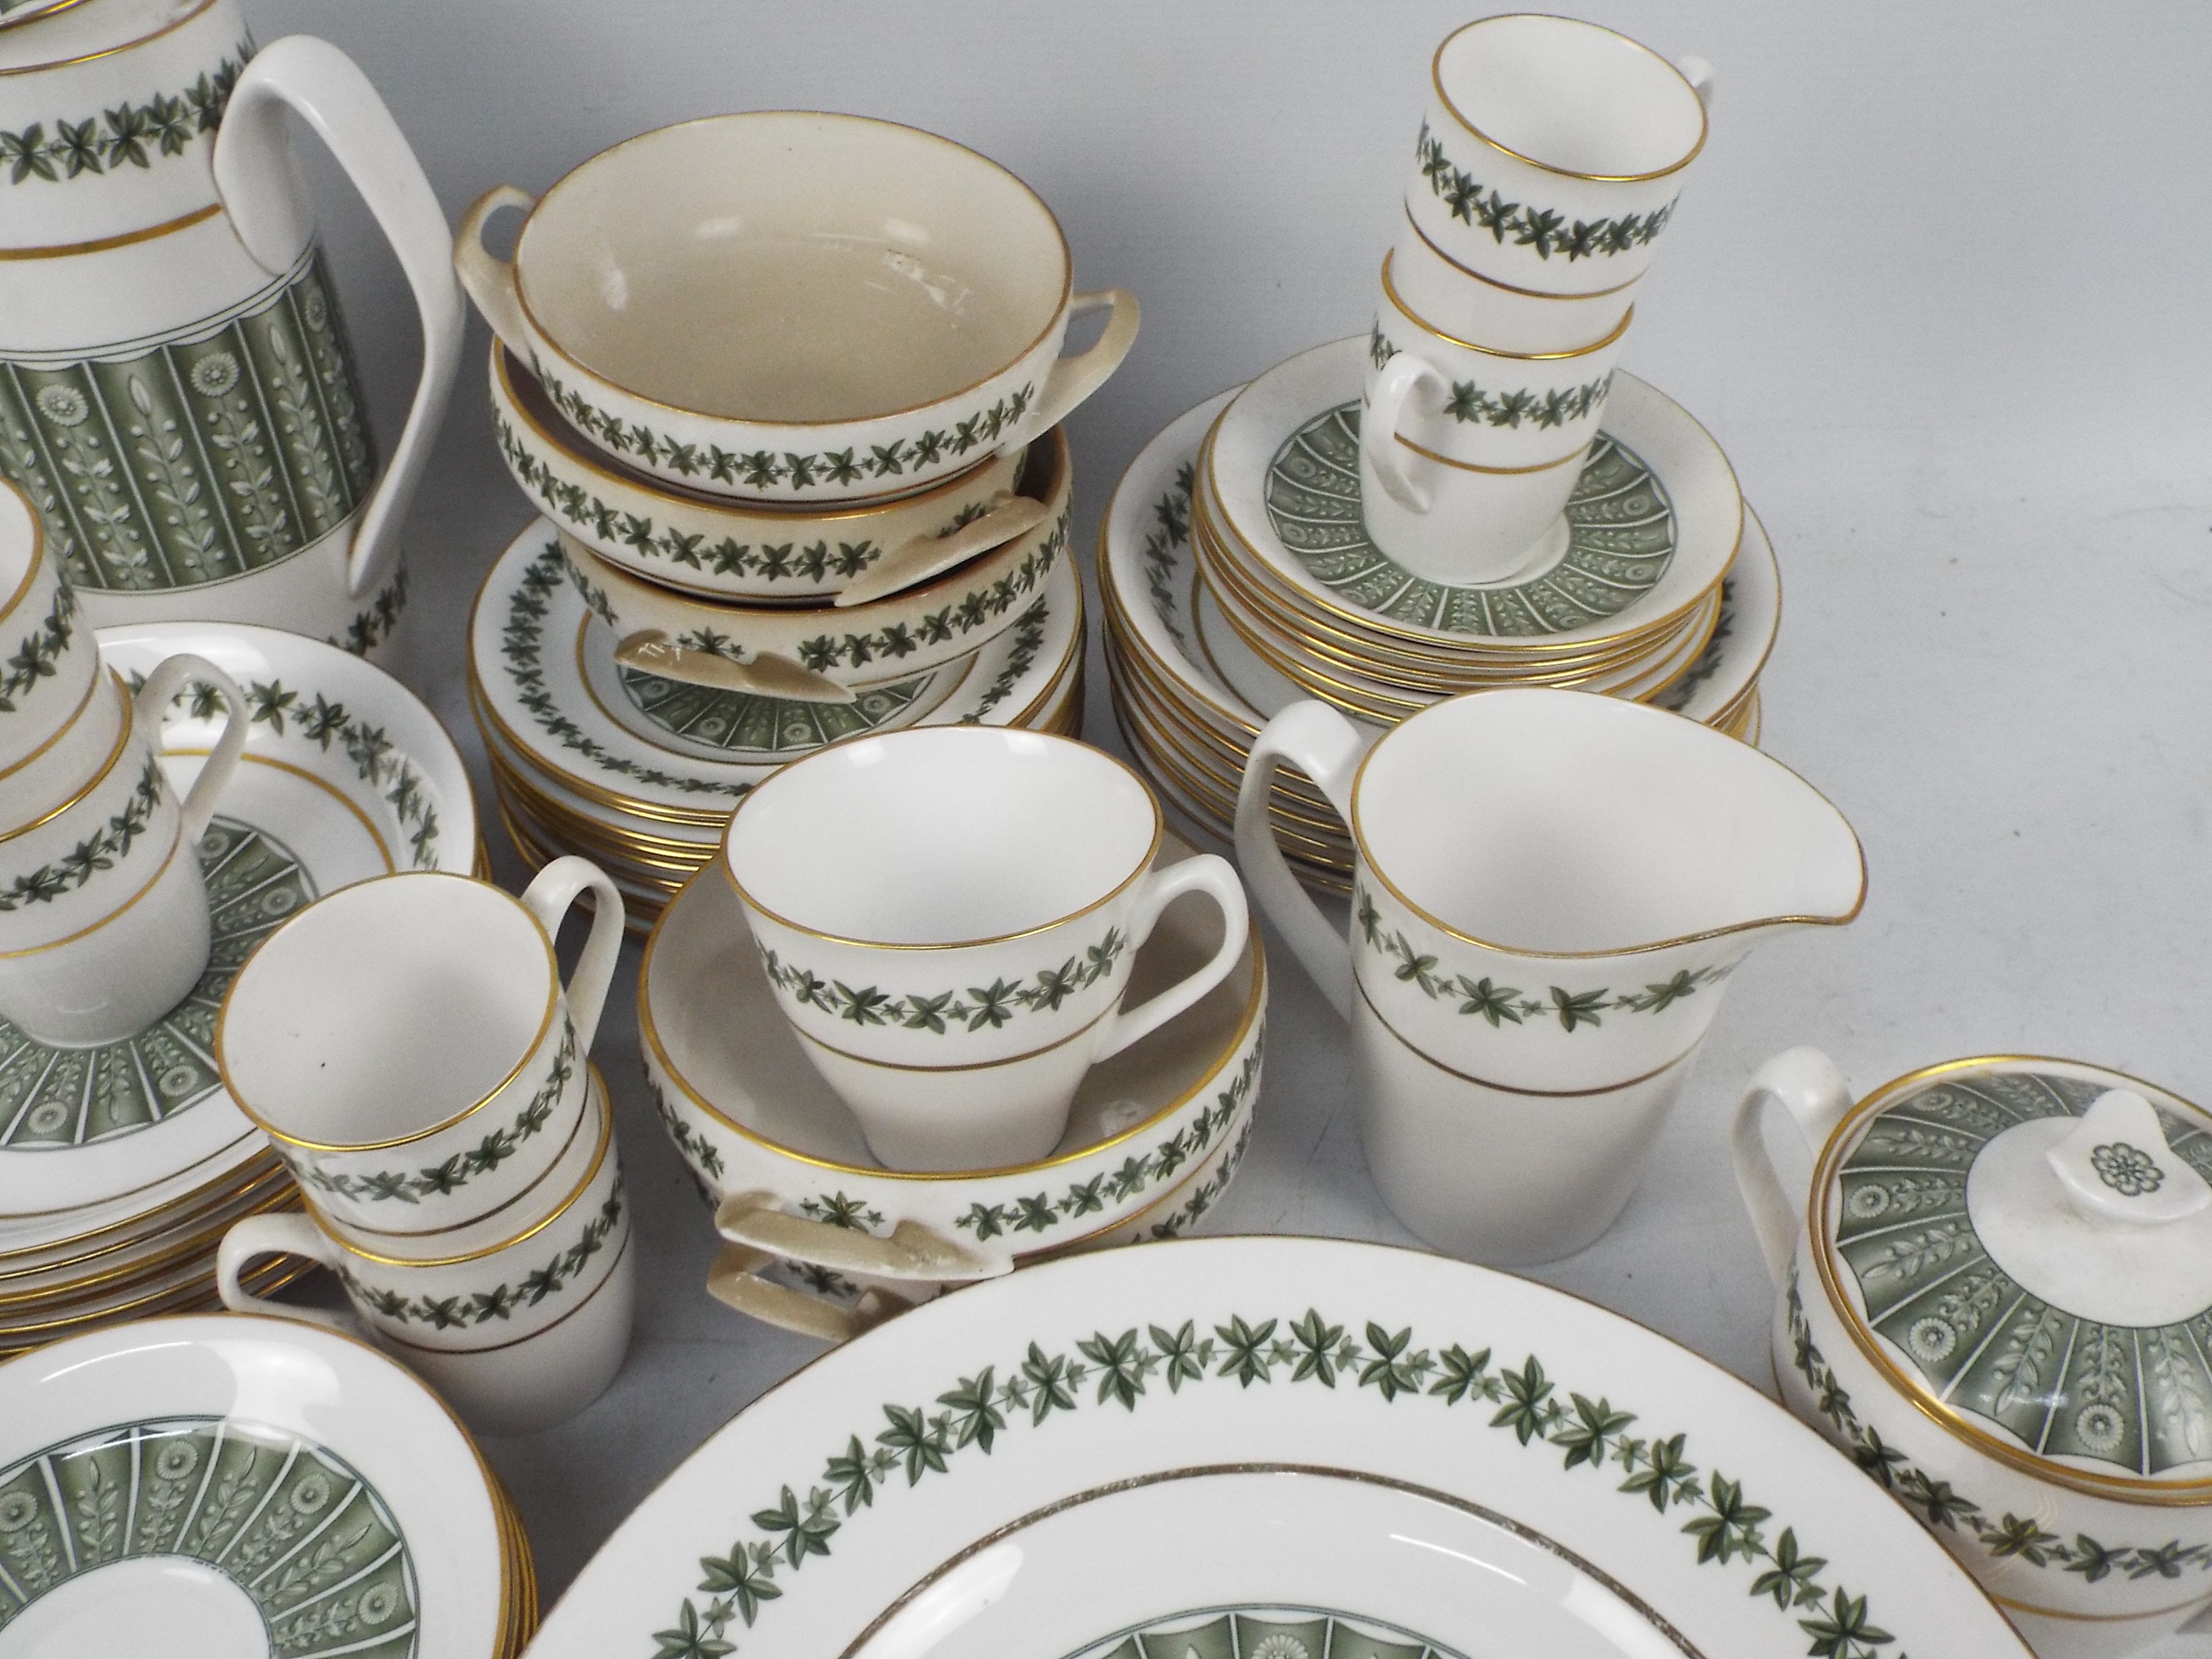 A quantity of Spode Provence pattern dinner and tea wares, approximately 100 pieces. - Image 5 of 7